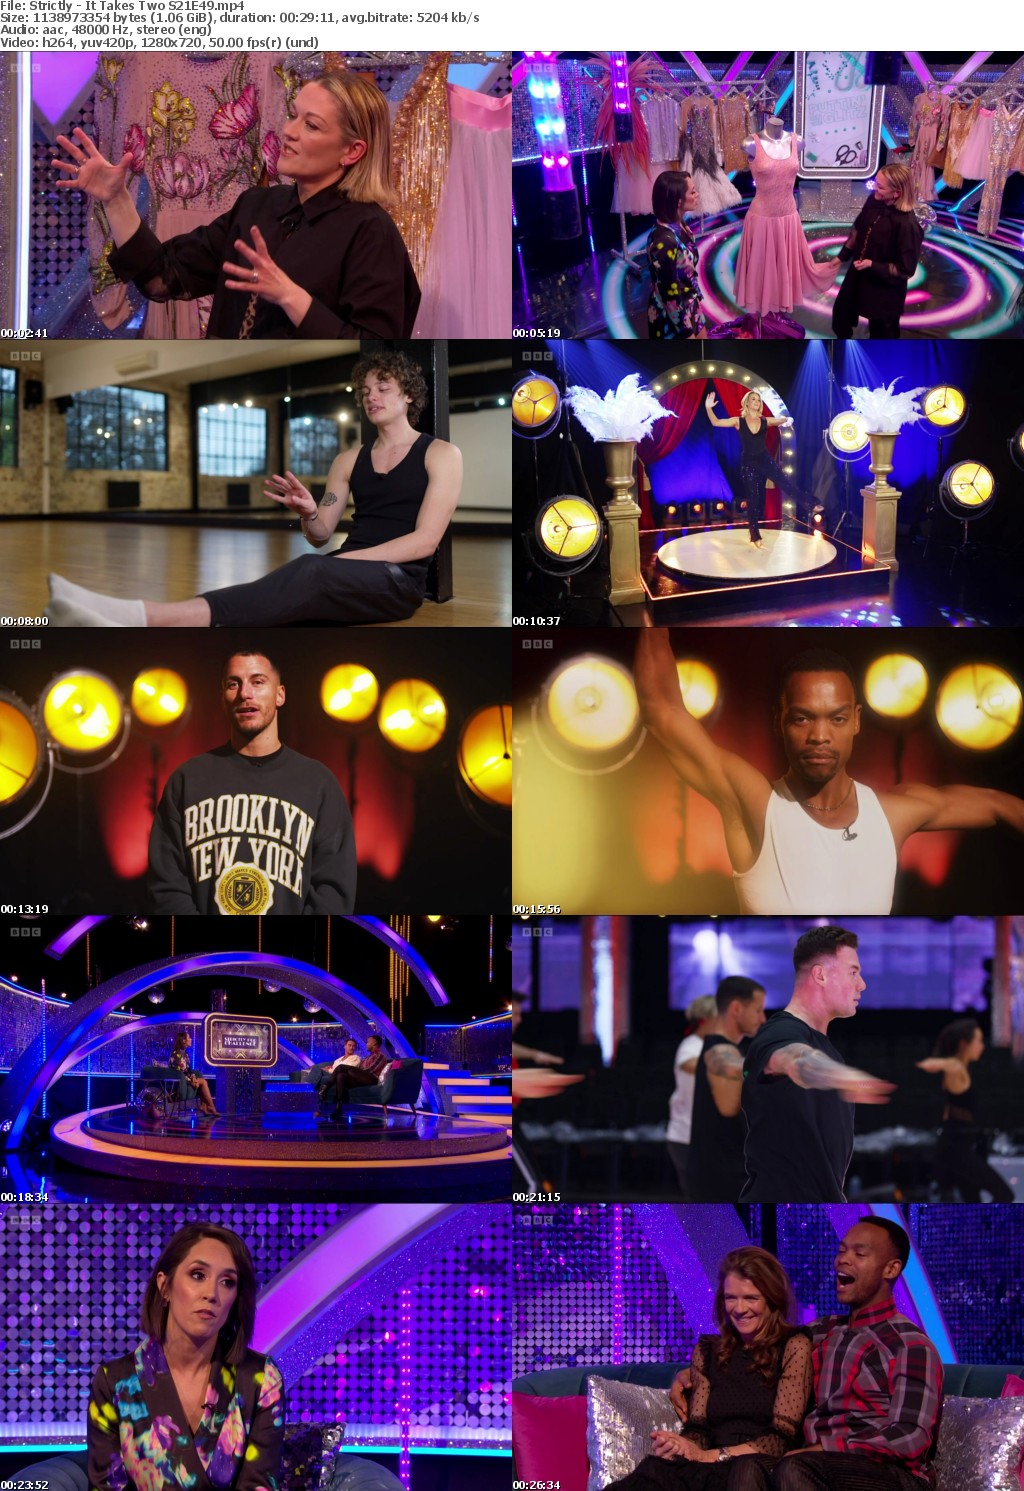 Strictly - It Takes Two S21E49 (1280x720p HD, 50fps, soft Eng subs)